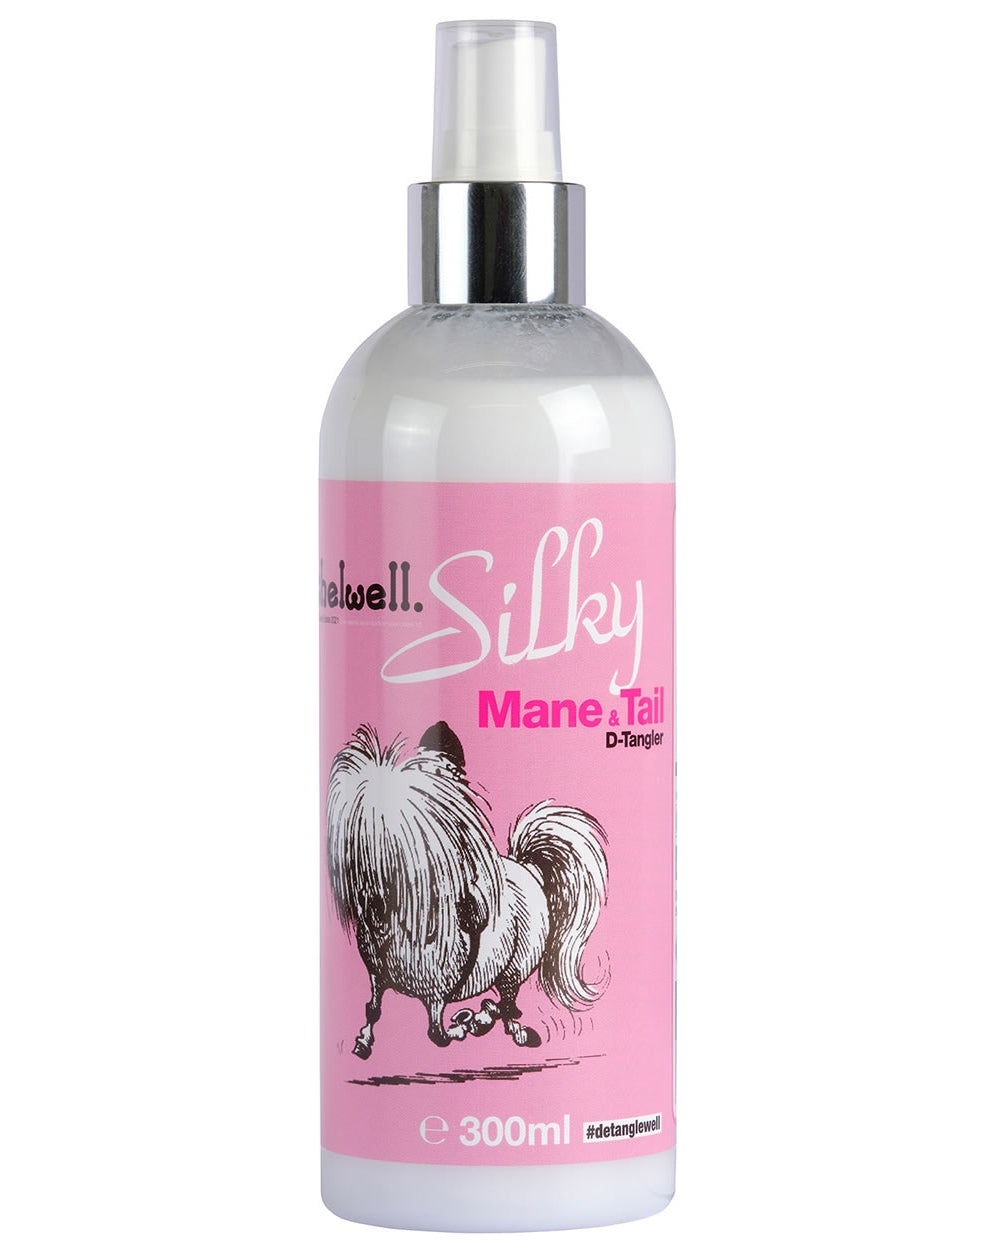 NAF Thelwell Silky Mane and Tail D-Tangler on white background